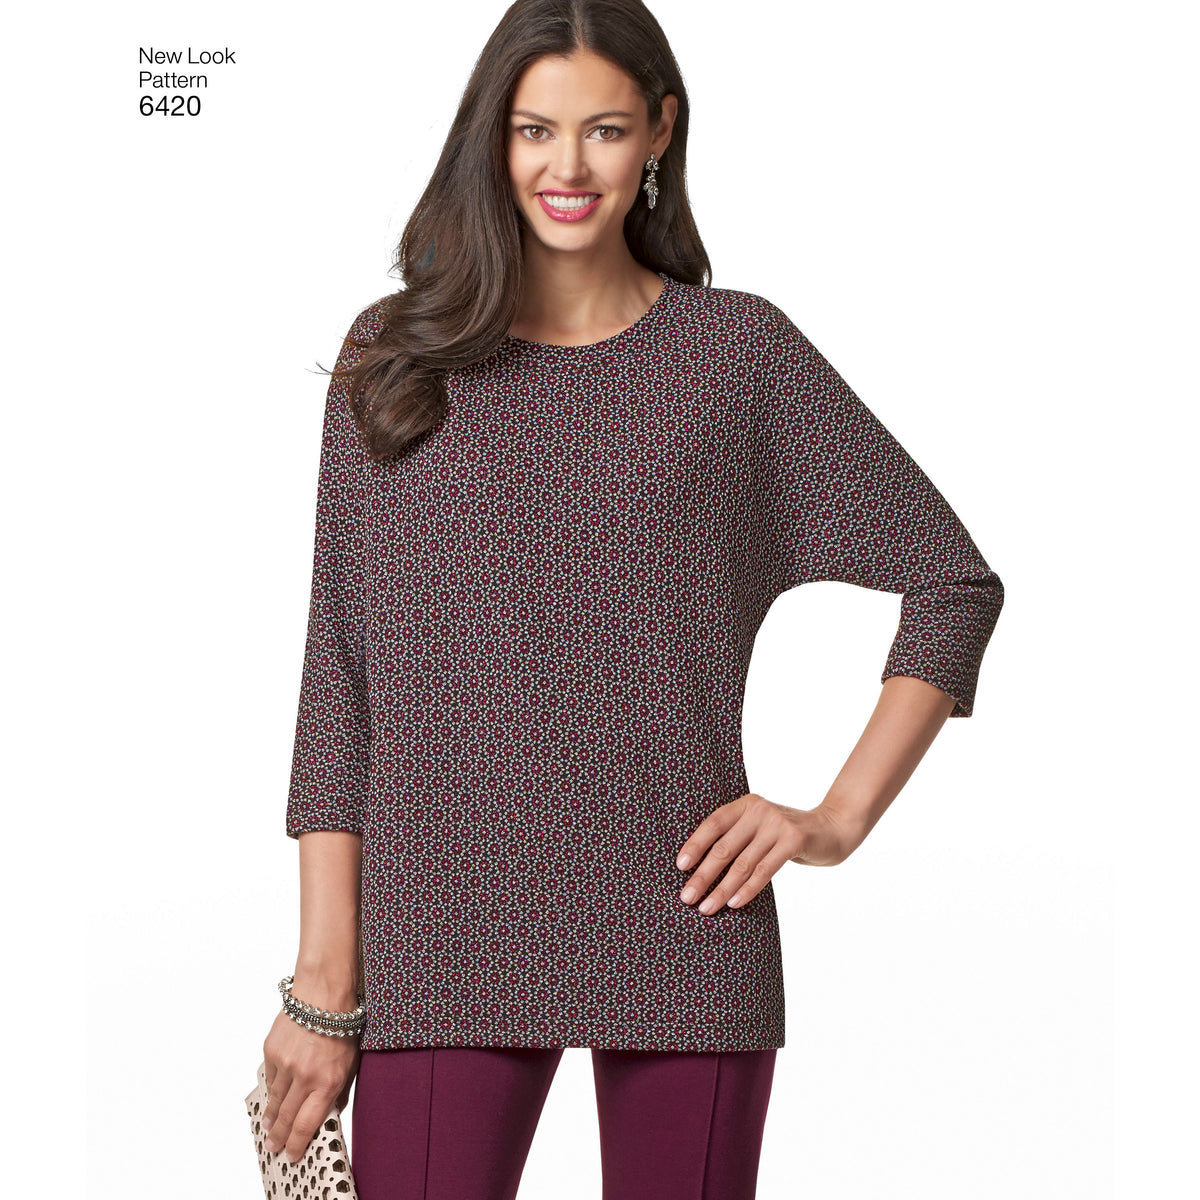 6420 Misses' Knit Skirt, Pants and Top